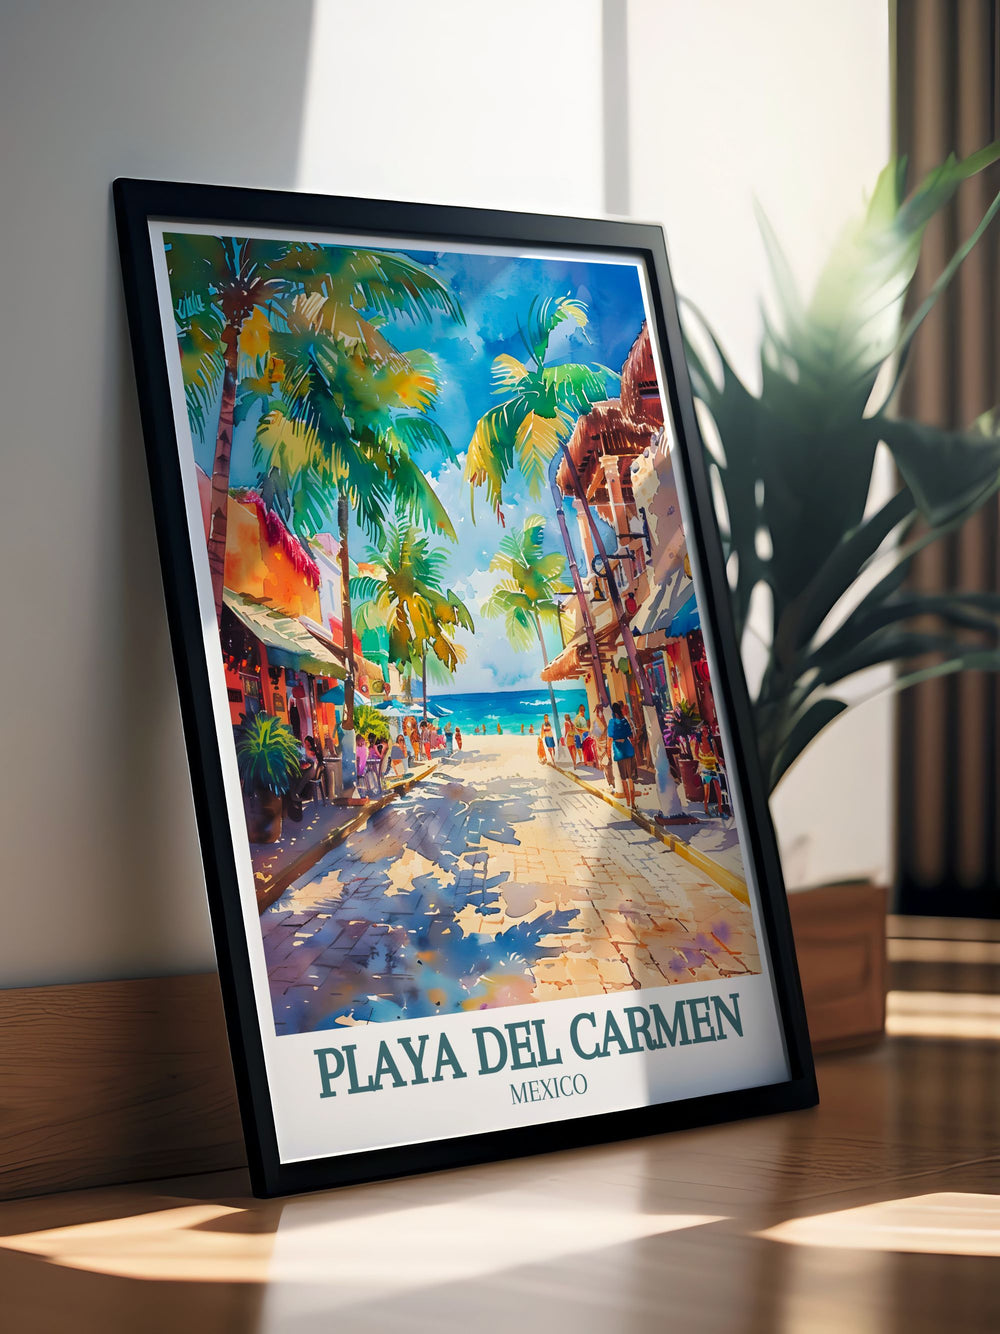 Stunning Playa Del Carmen art showcasing La Quinta Avenida and the Caribbean Sea bringing the lively spirit of Mexico into your home decor perfect for those who love vibrant and colorful artwork inspired by travel.